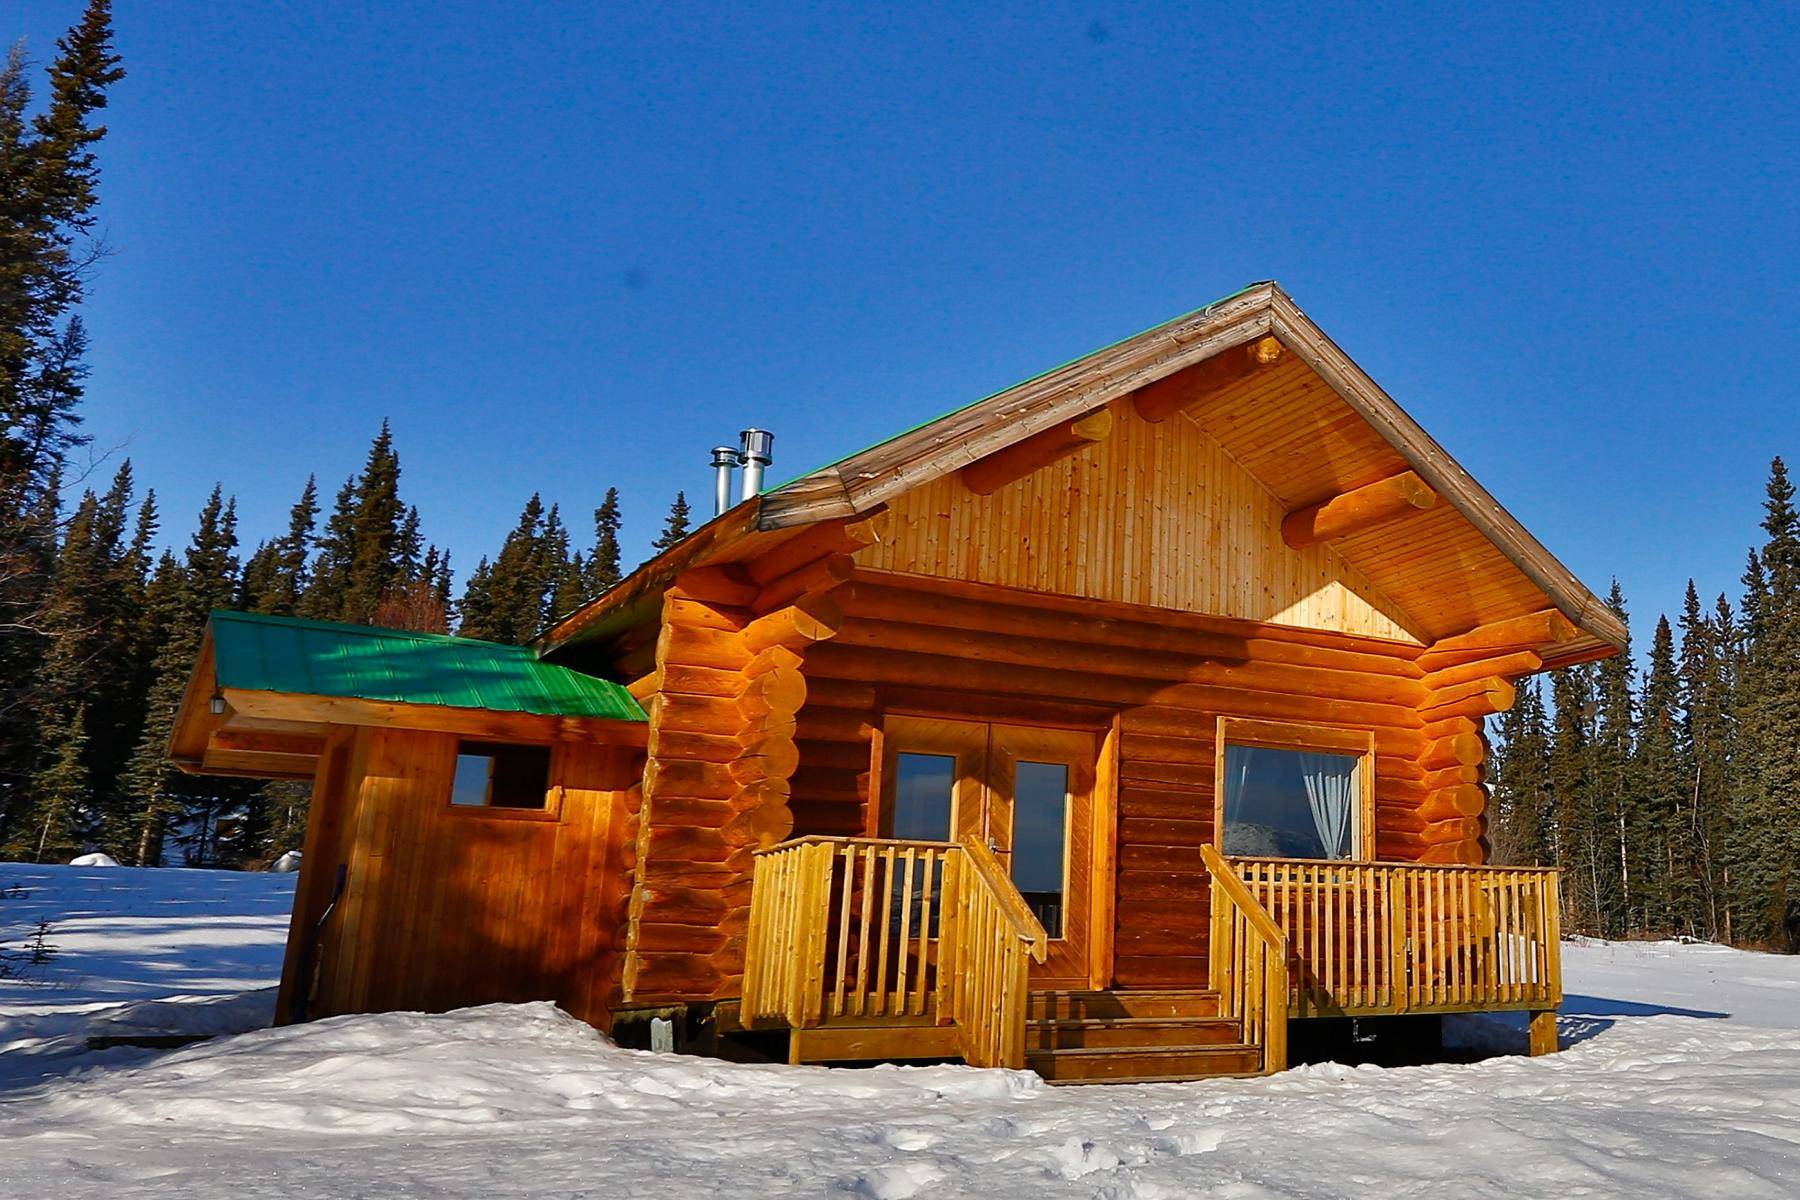 Front of the family cabin in winter